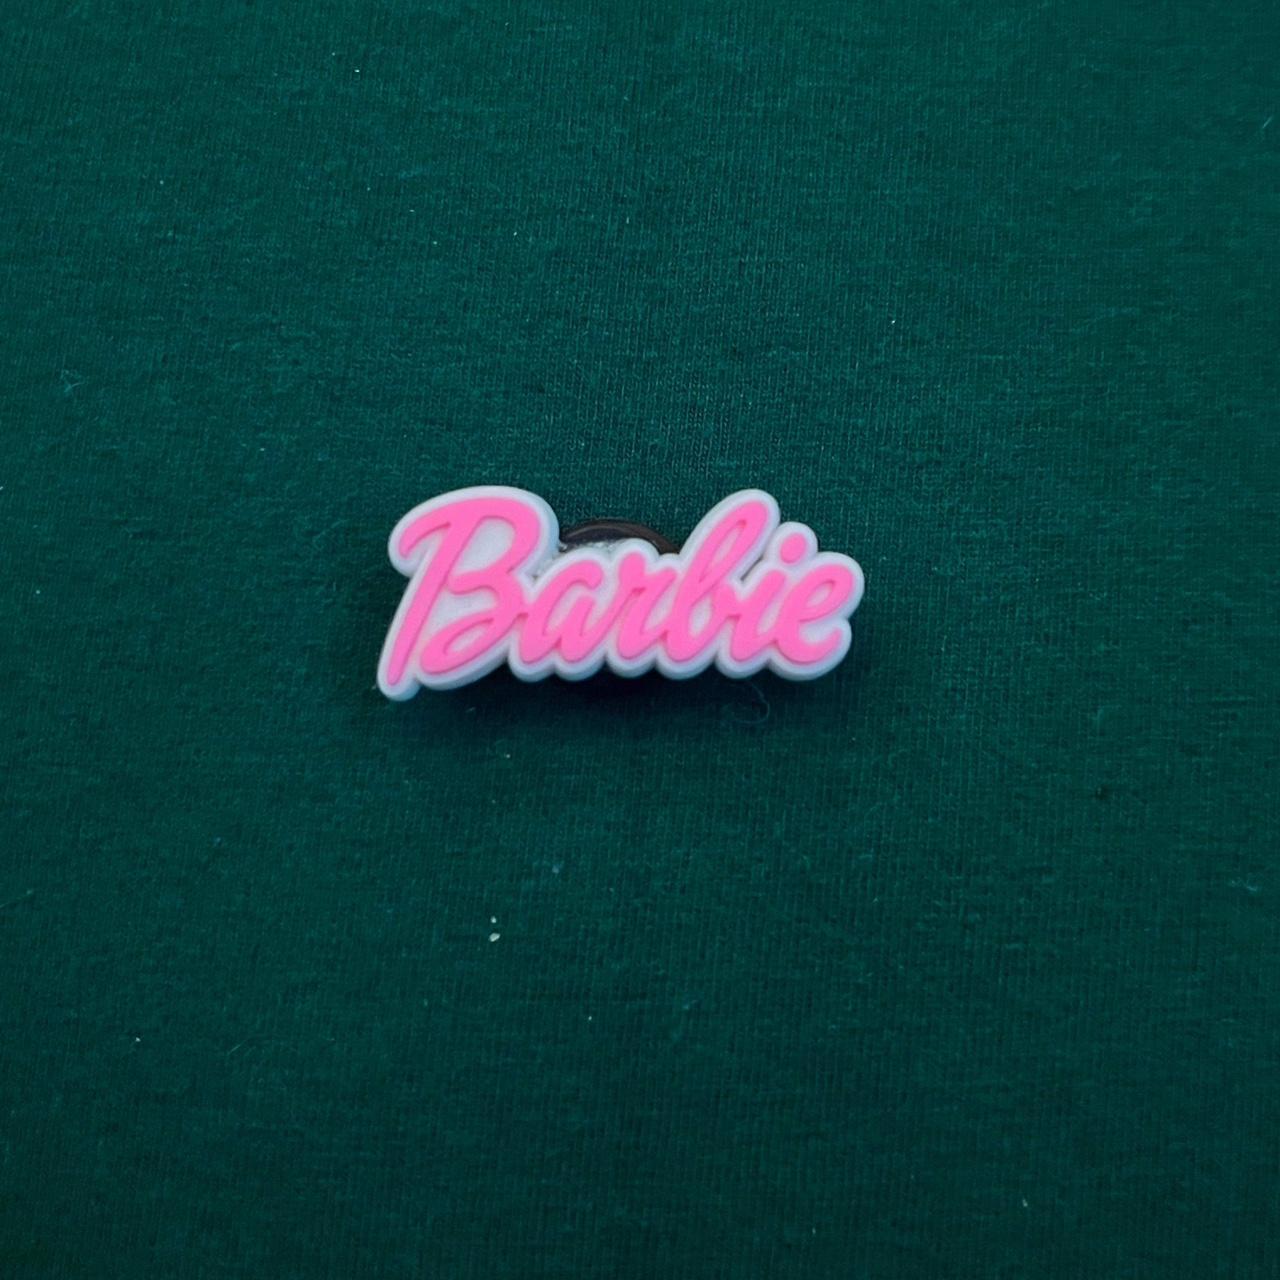 Barbie croc charms! charms from the barbie and croc - Depop